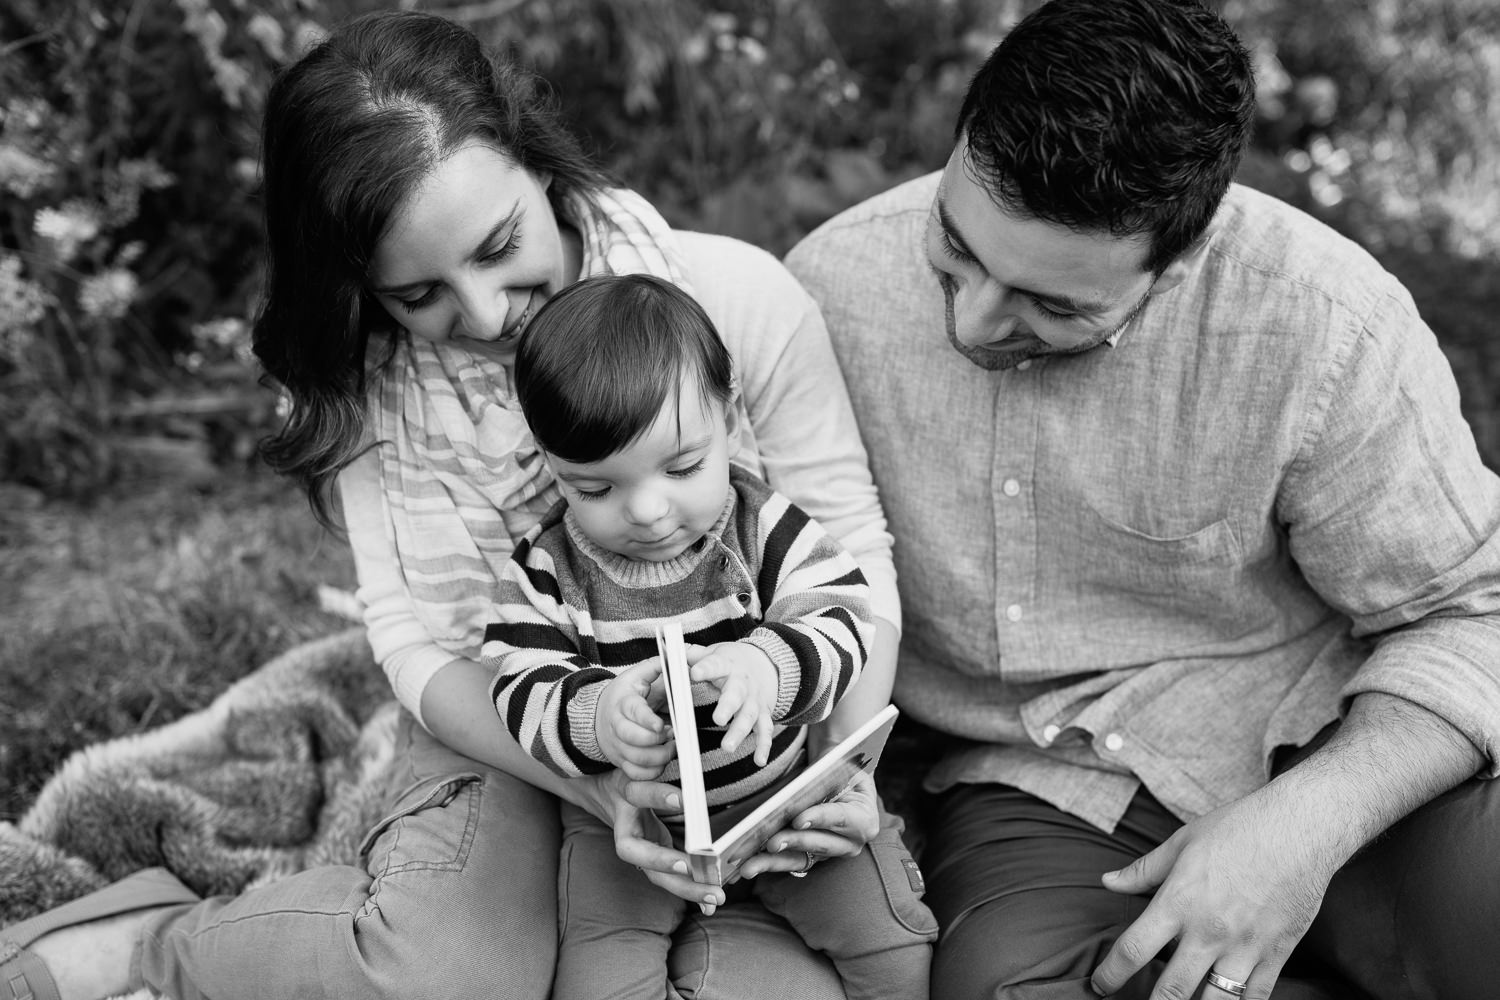 Markham Lifestyle Photographyfamily of 3 sitting on fur blanket under willow tree at sunset, 1 year old baby boy sitting on mom's lap reading story, dad next to them smiling down at son - 